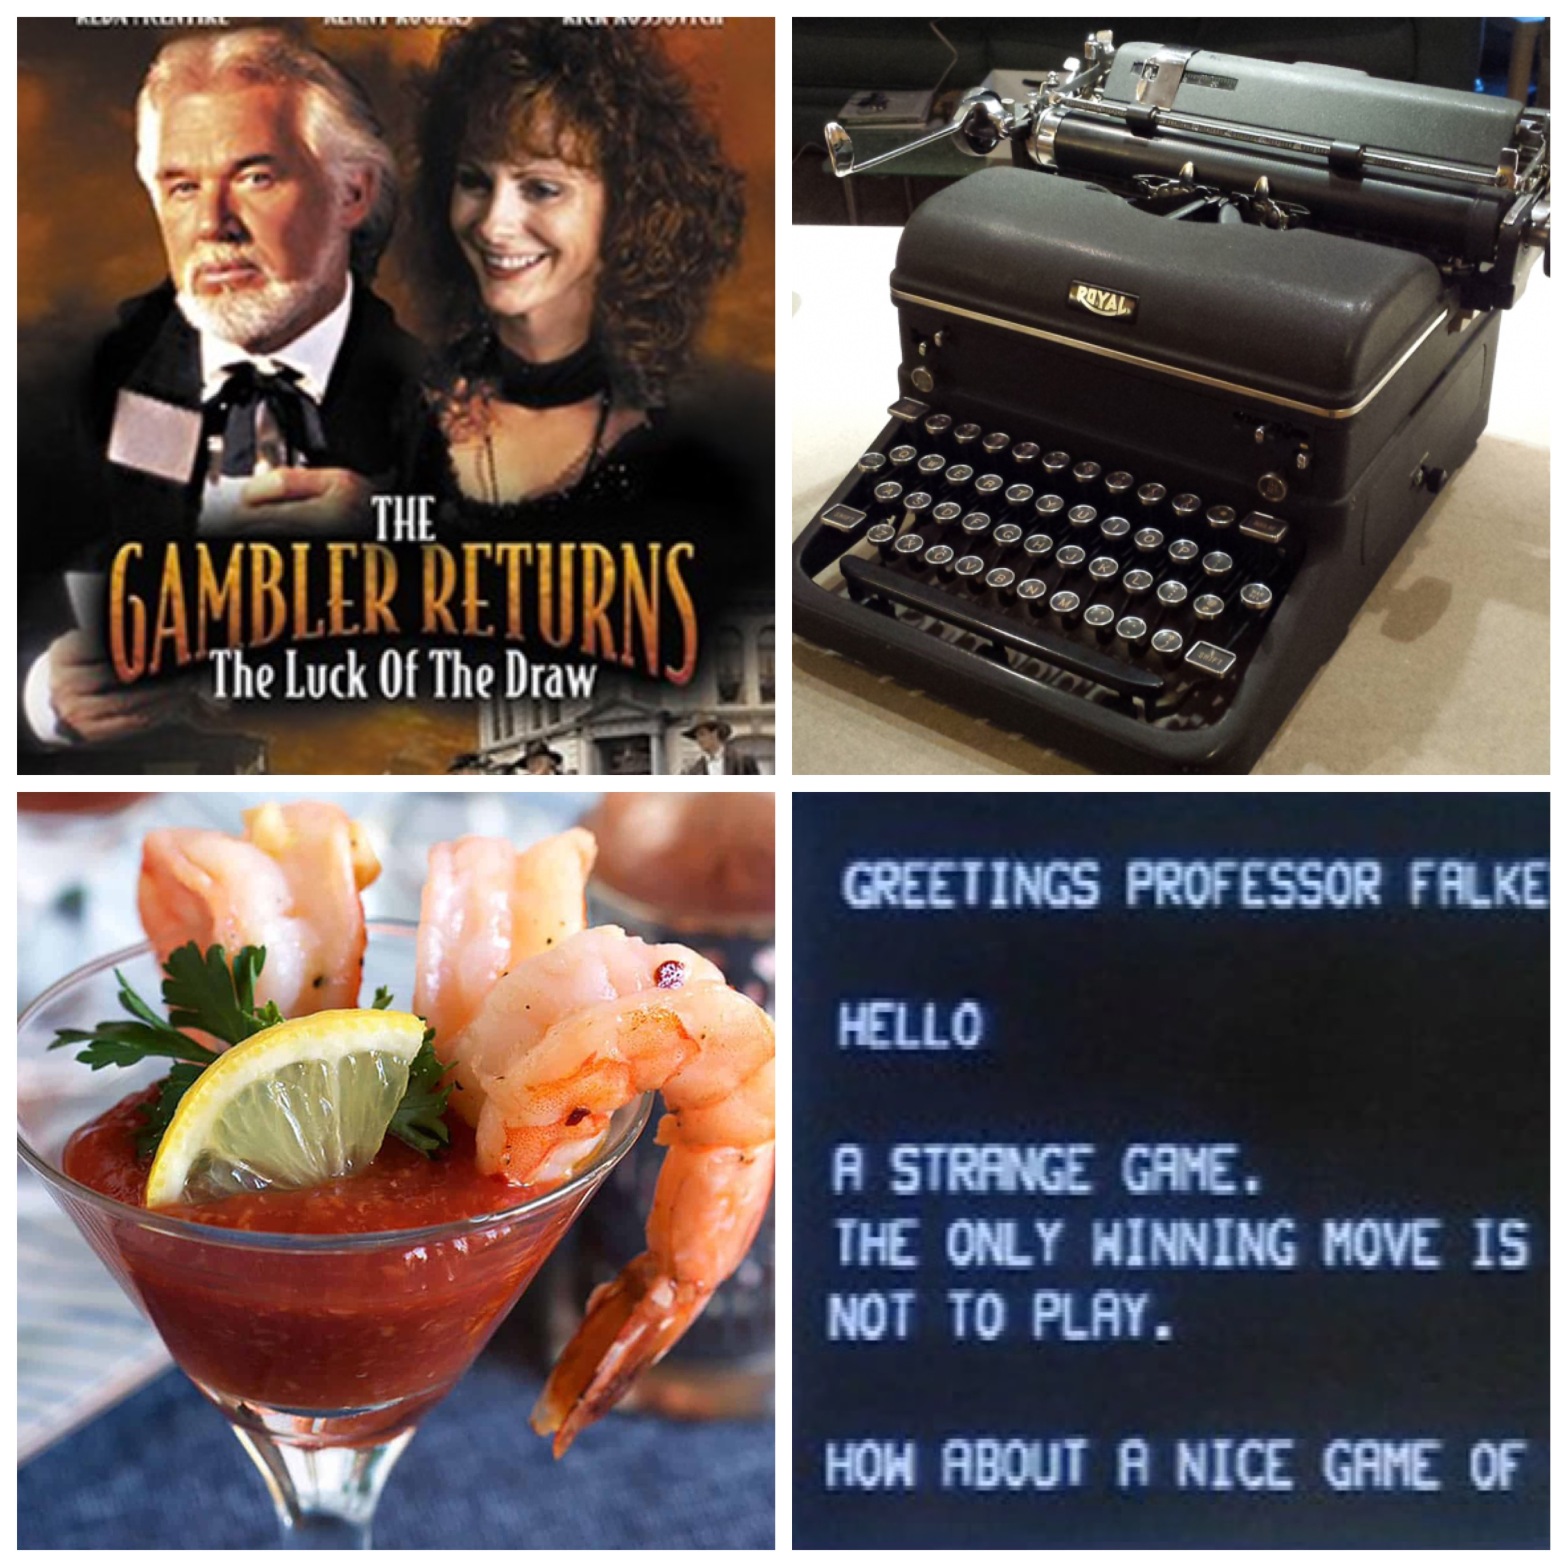 Kenny Rogers and Reba McEntire in The Gambler Returns The Luck of the Draw. A 1947 Royal KMM typewriter. Shrimp cocktail. The "strange game" text from War Games.